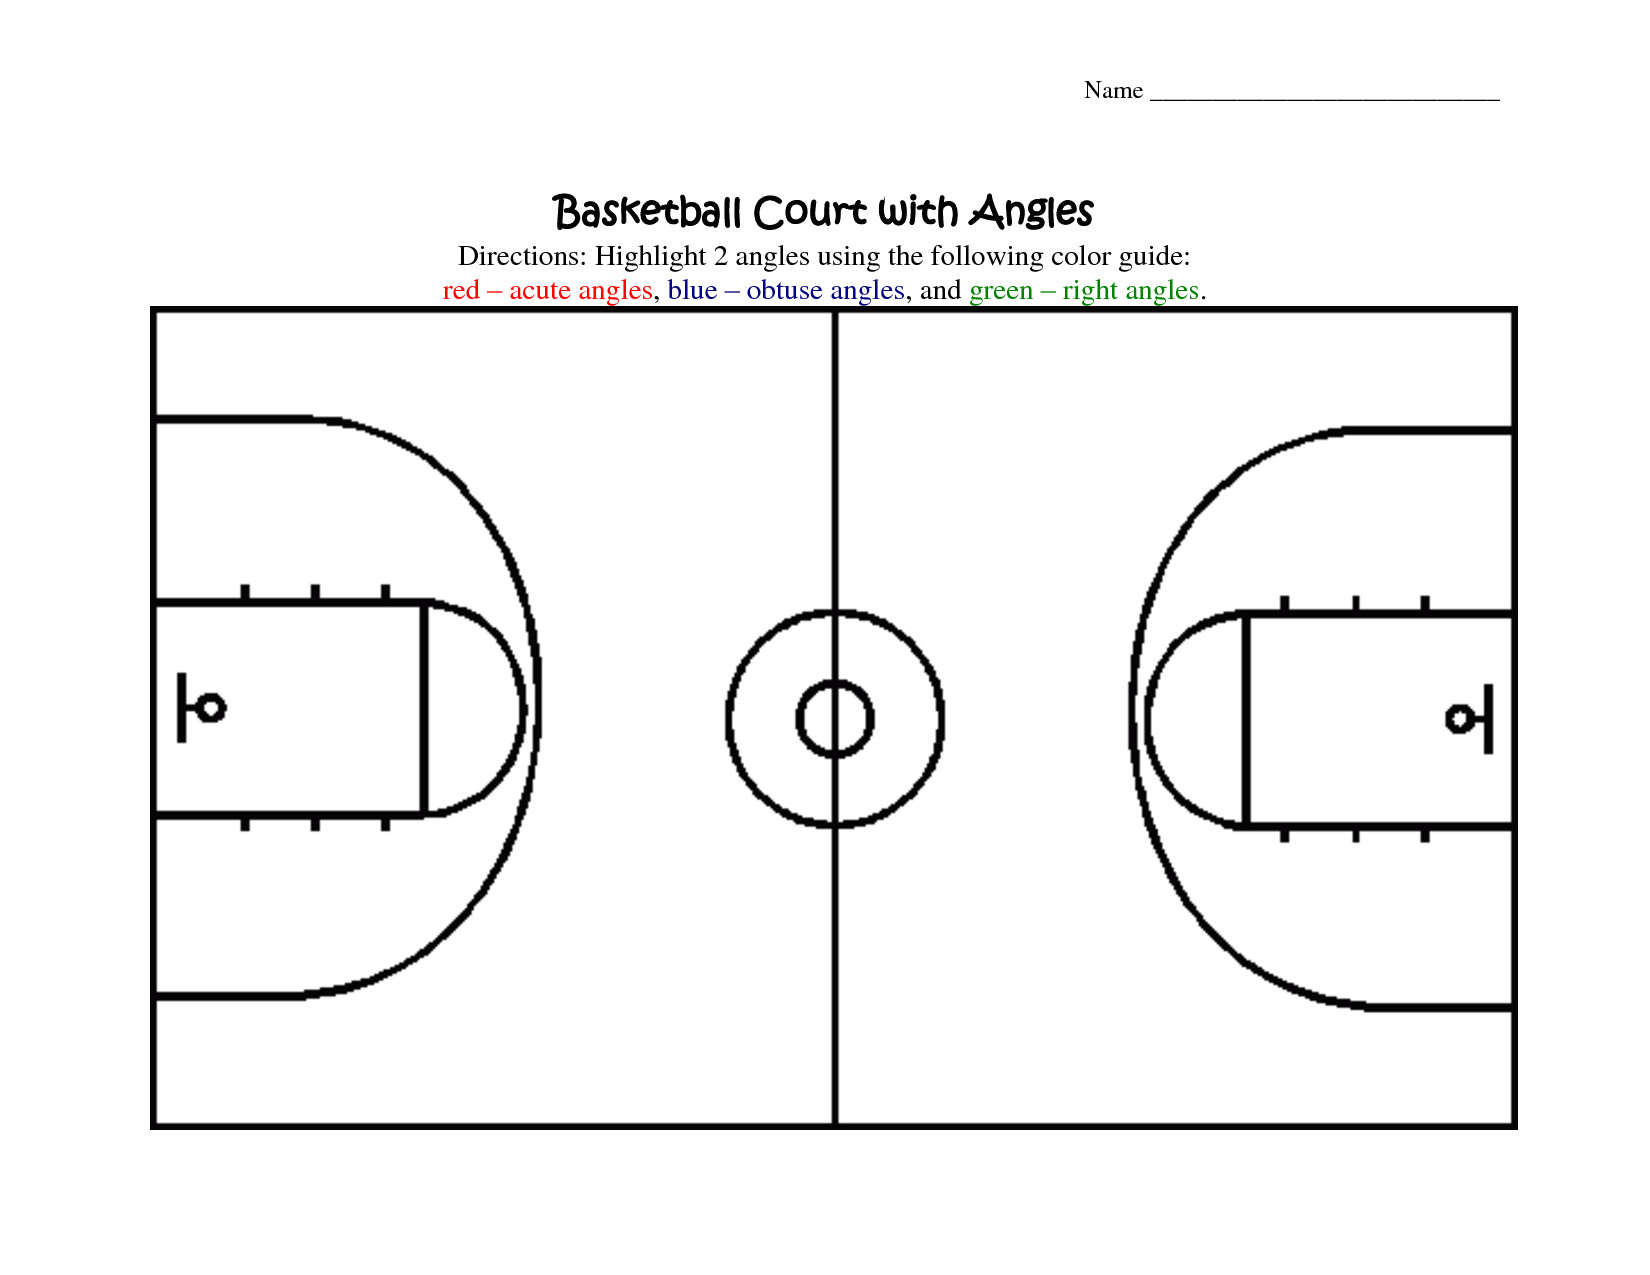 post basketball court template in word 97342